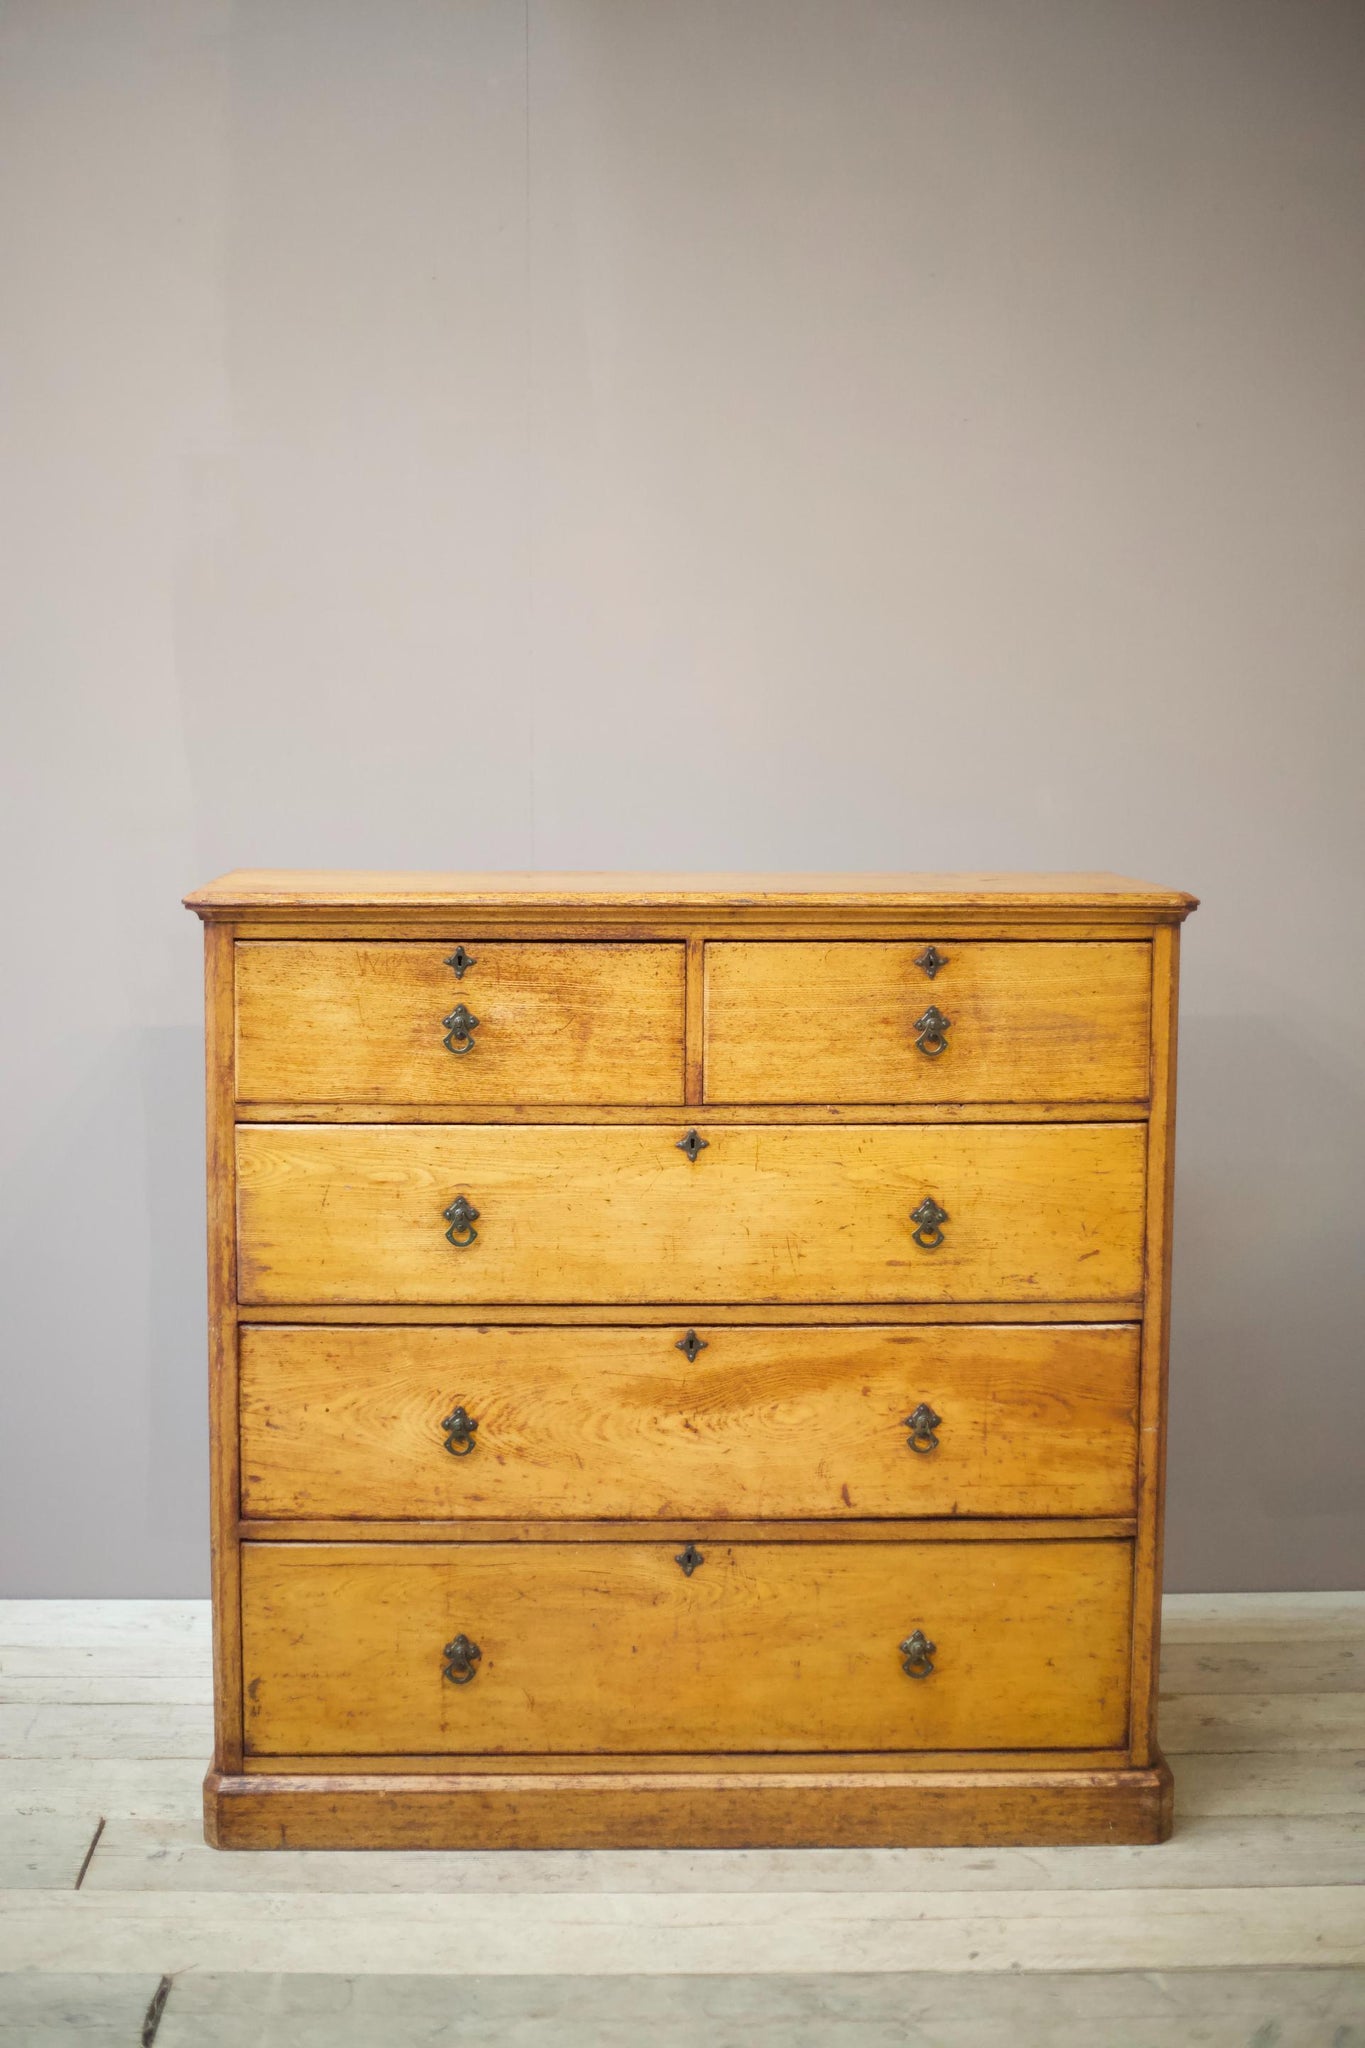 19th century Ash Aesthetic movement chest of drawers